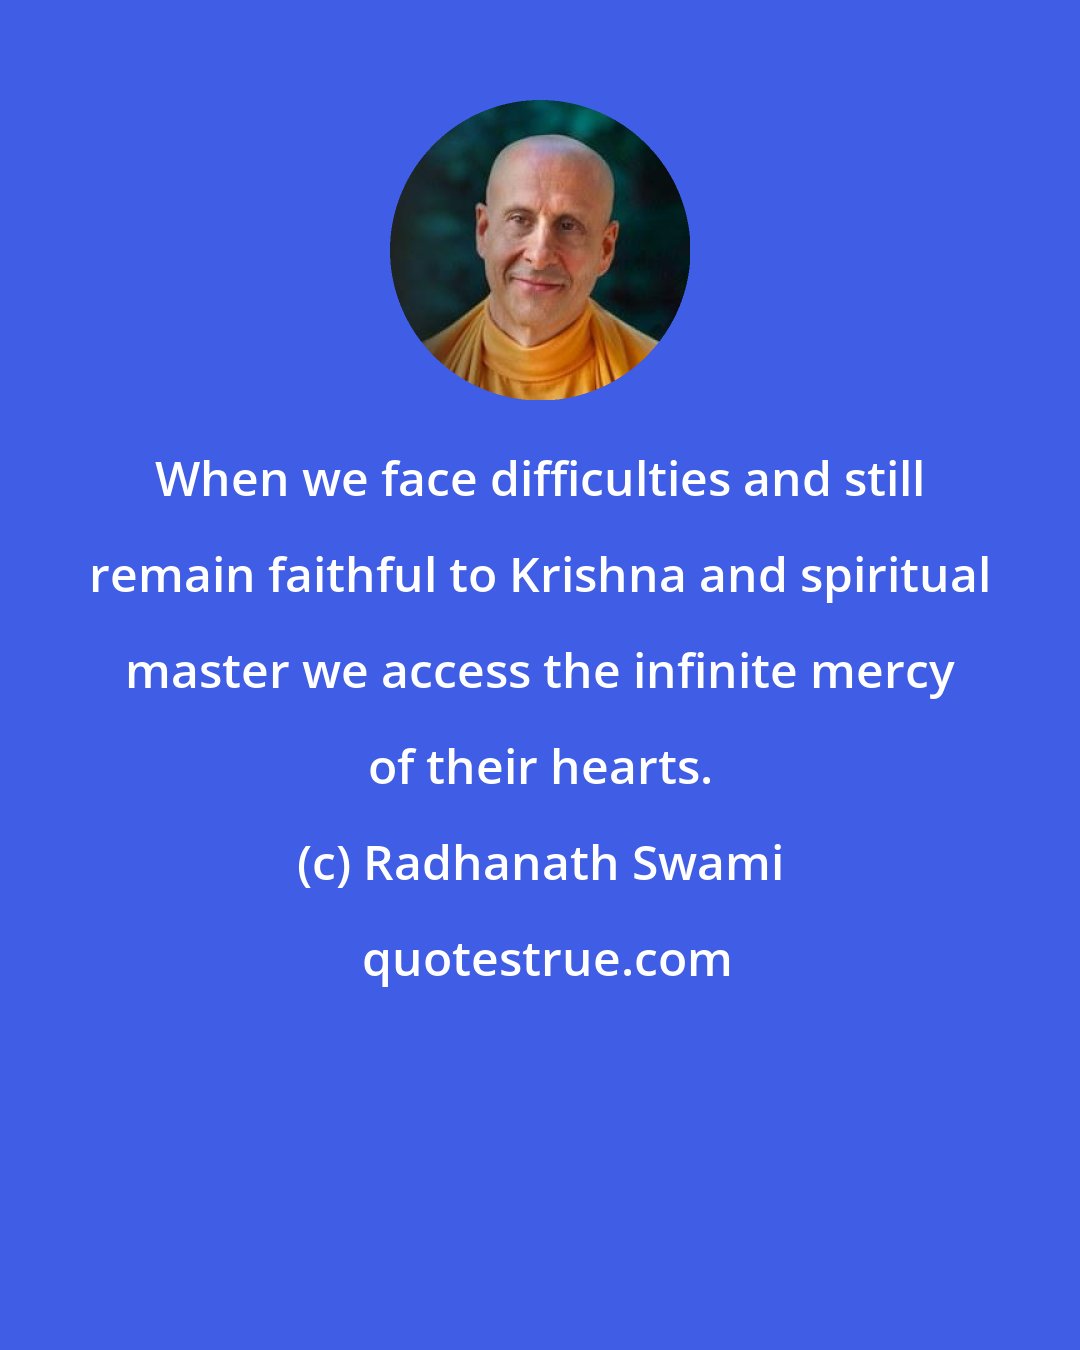 Radhanath Swami: When we face difficulties and still remain faithful to Krishna and spiritual master we access the infinite mercy of their hearts.